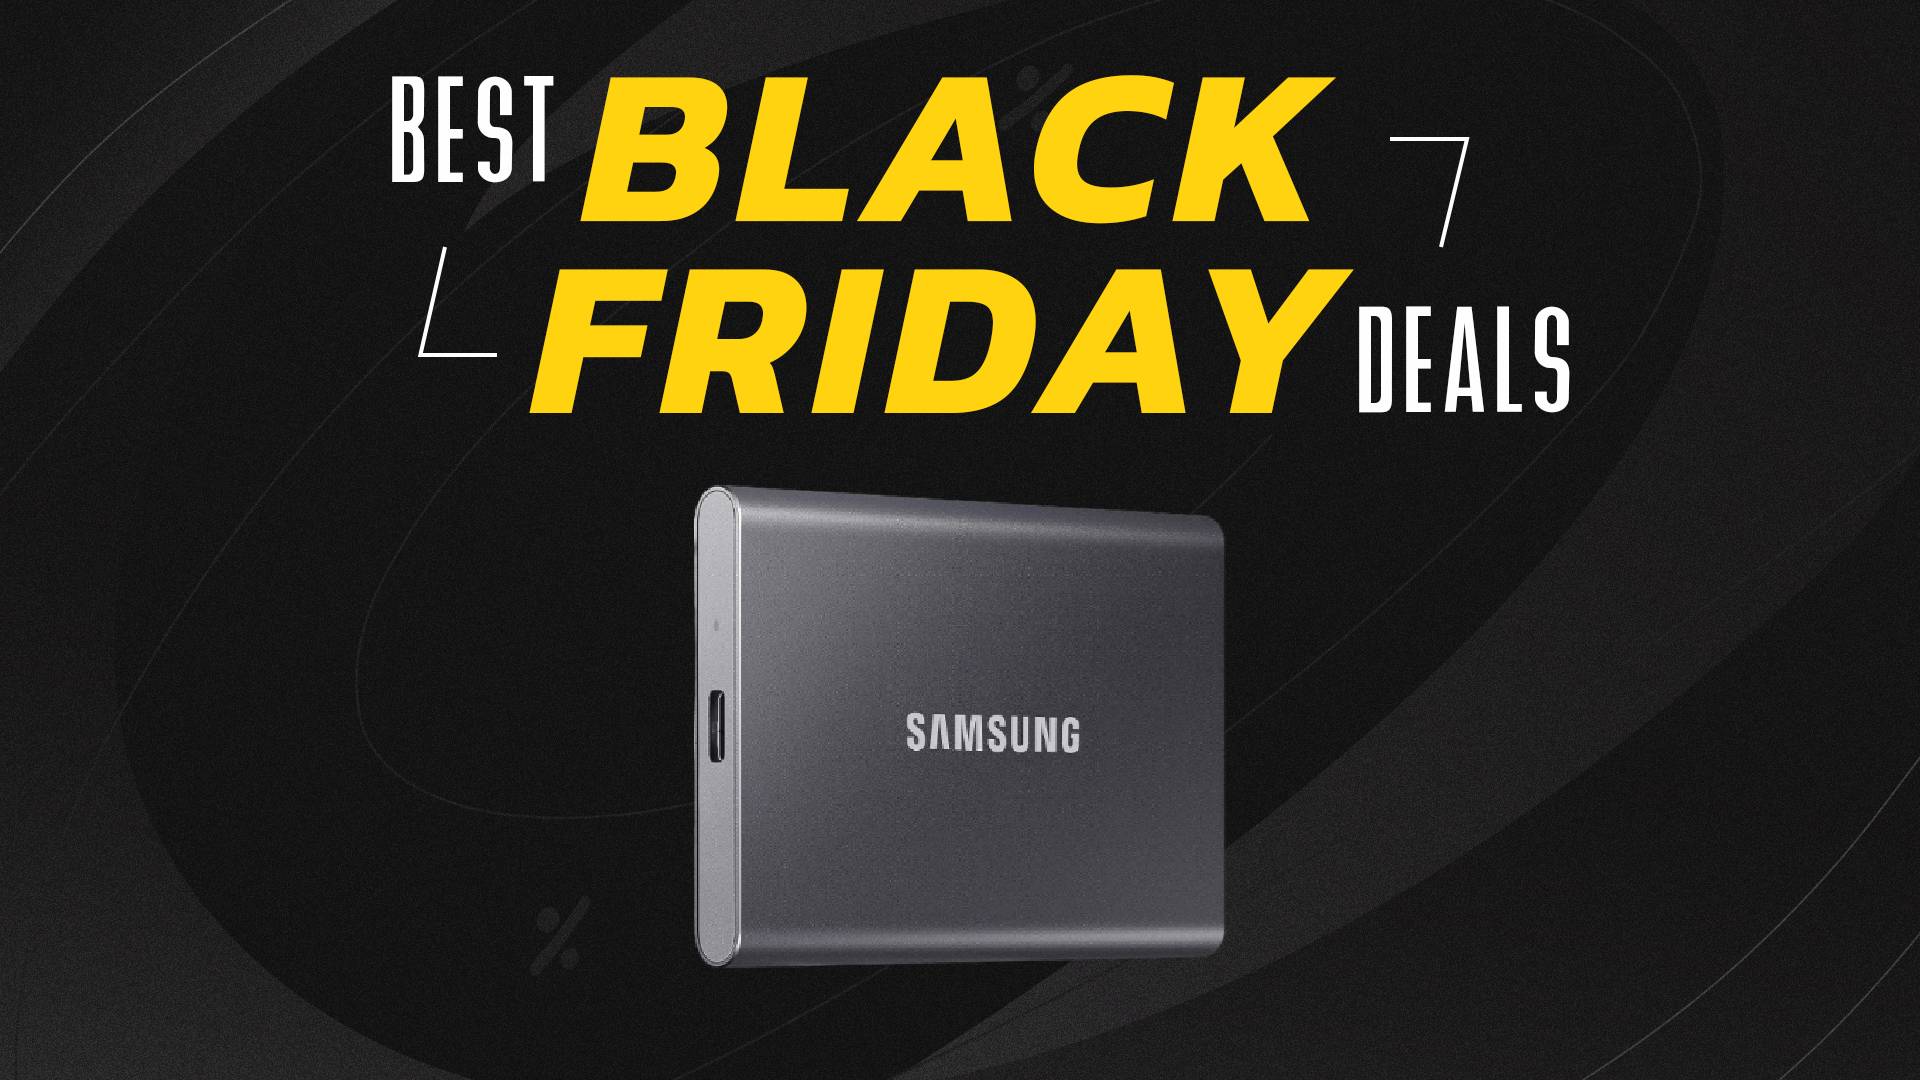 Save on this 2TB Samsung SSD with early Black Friday deal - Dexerto